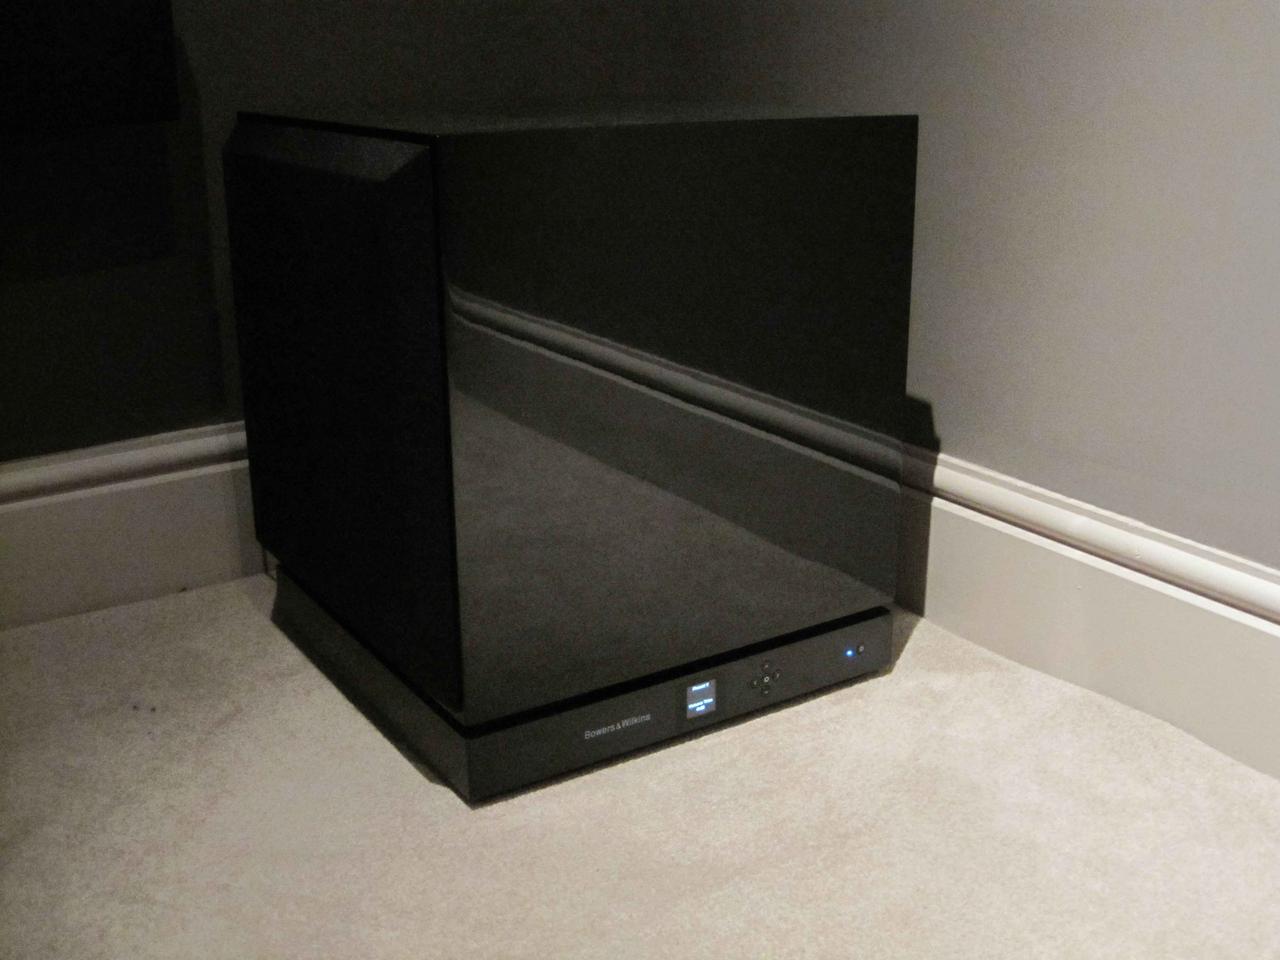 Anyone purchase/demo Subwoofer? | Home Theater Forums